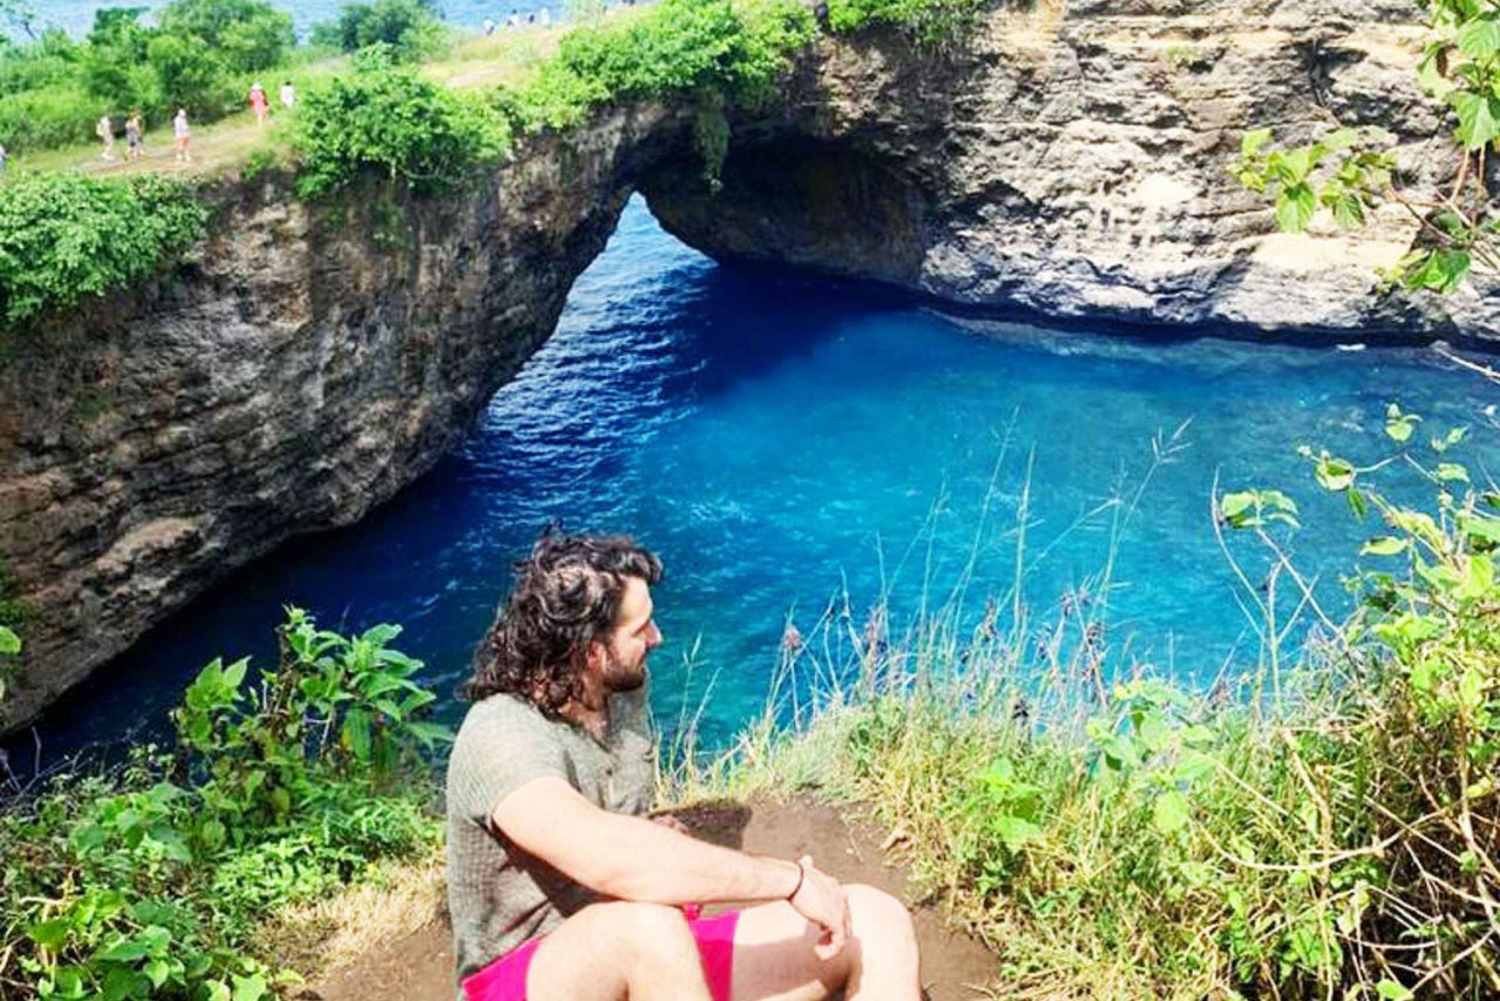 From Bali: Nusa Penida Private Day Tour with Lunch Option